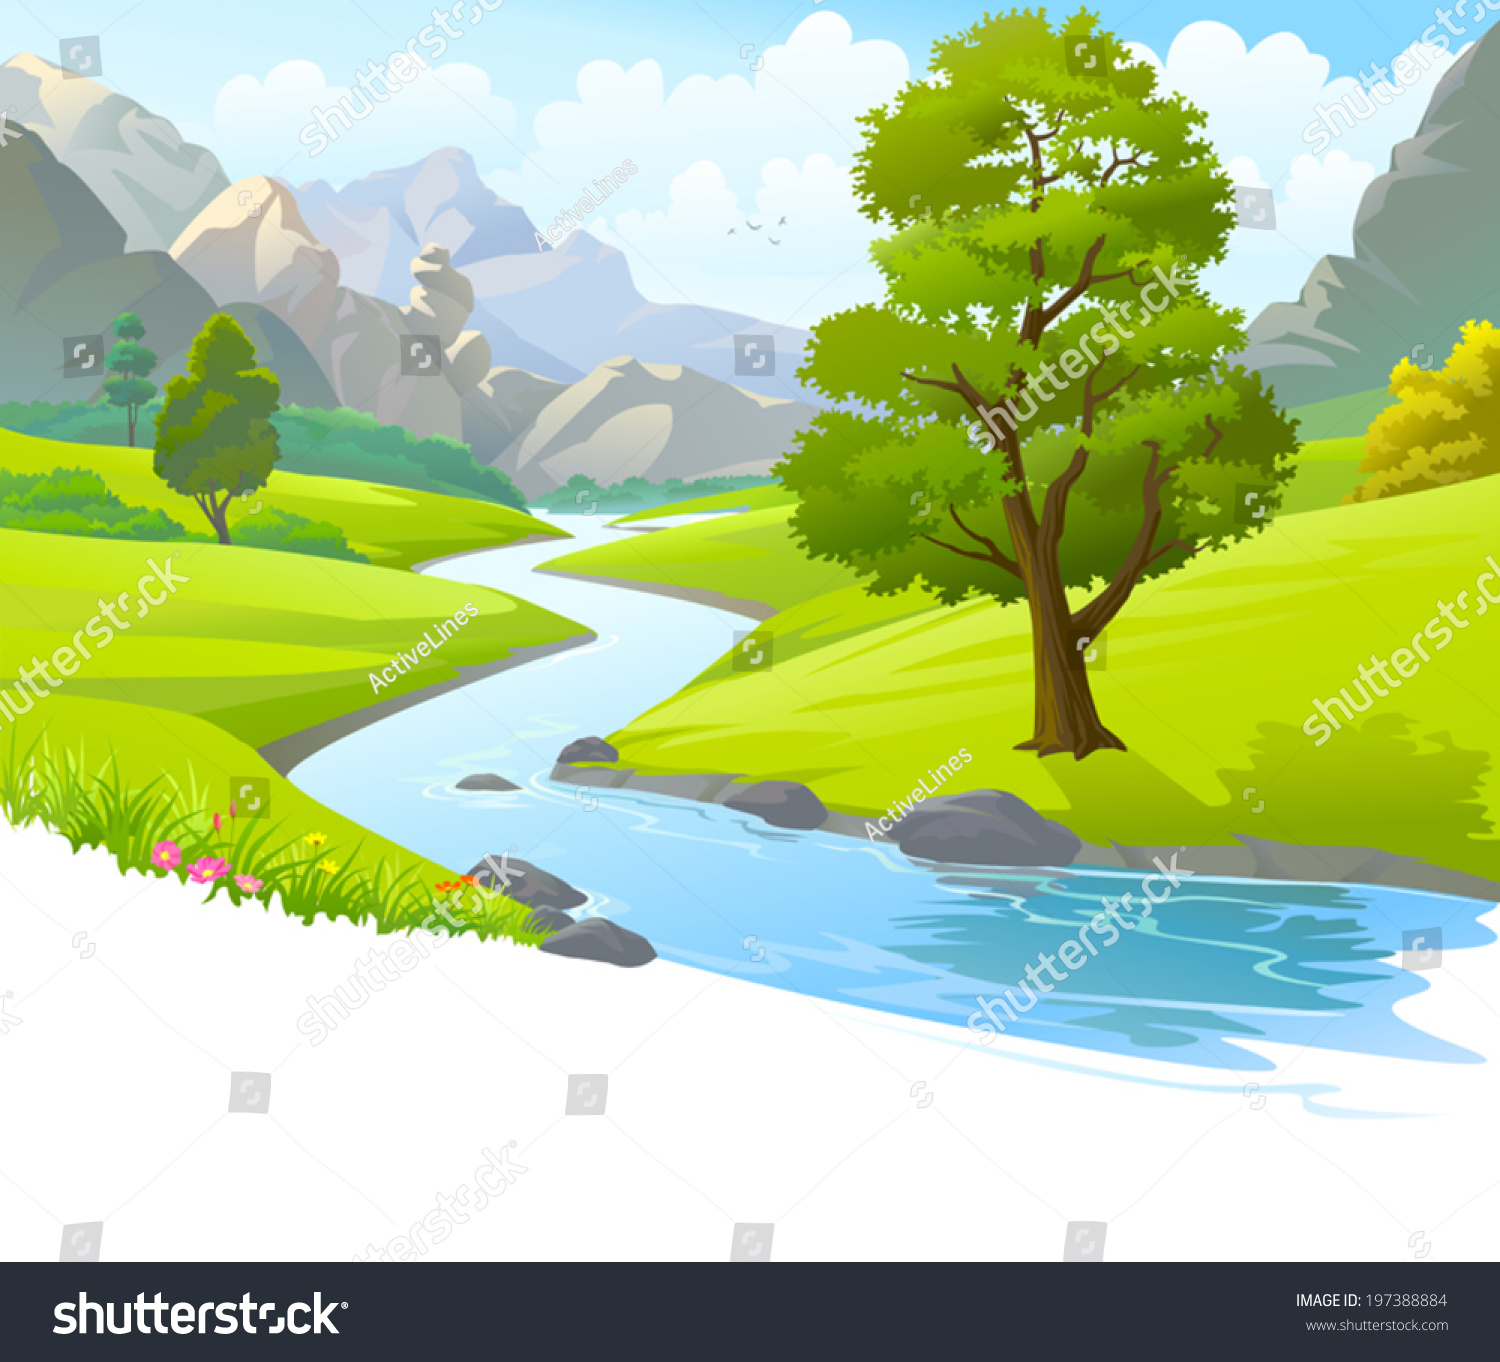 clipart rivers streams - photo #31